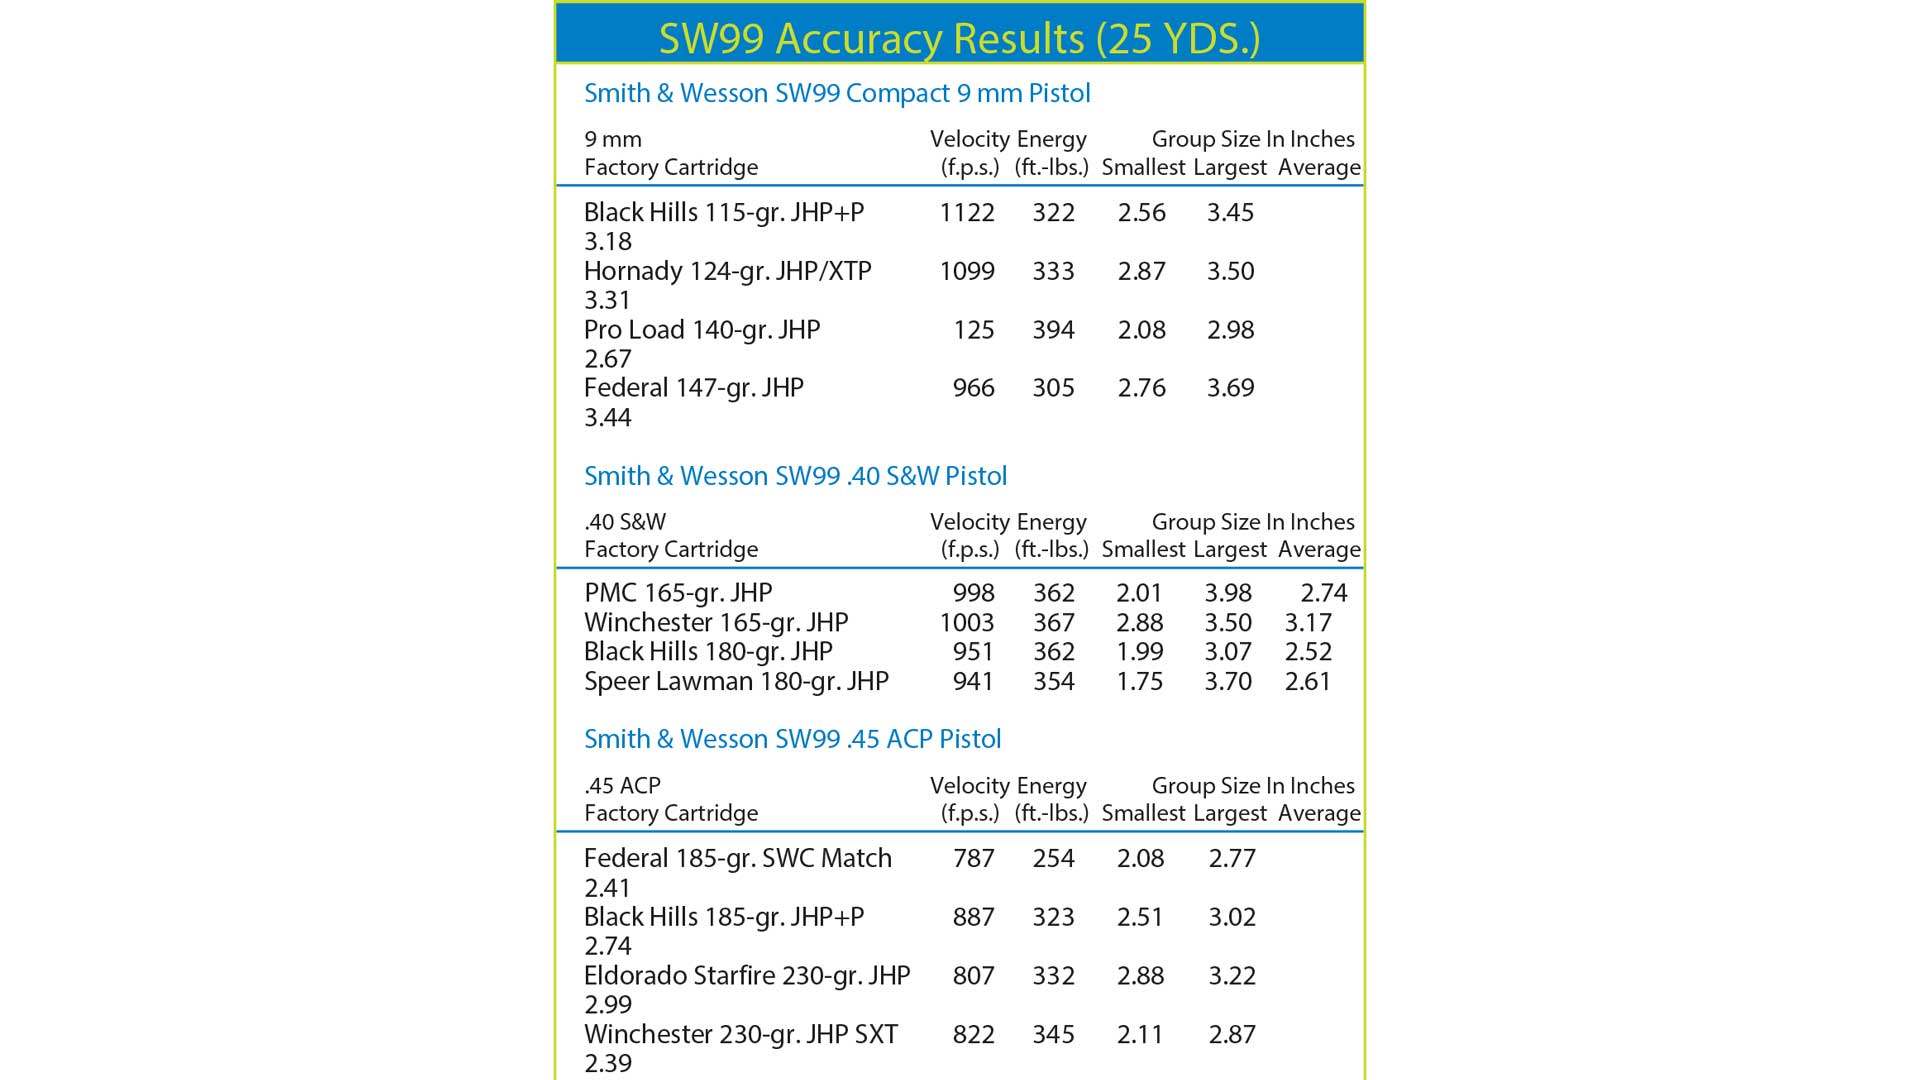 Specification table with accuracy results for three handguns.